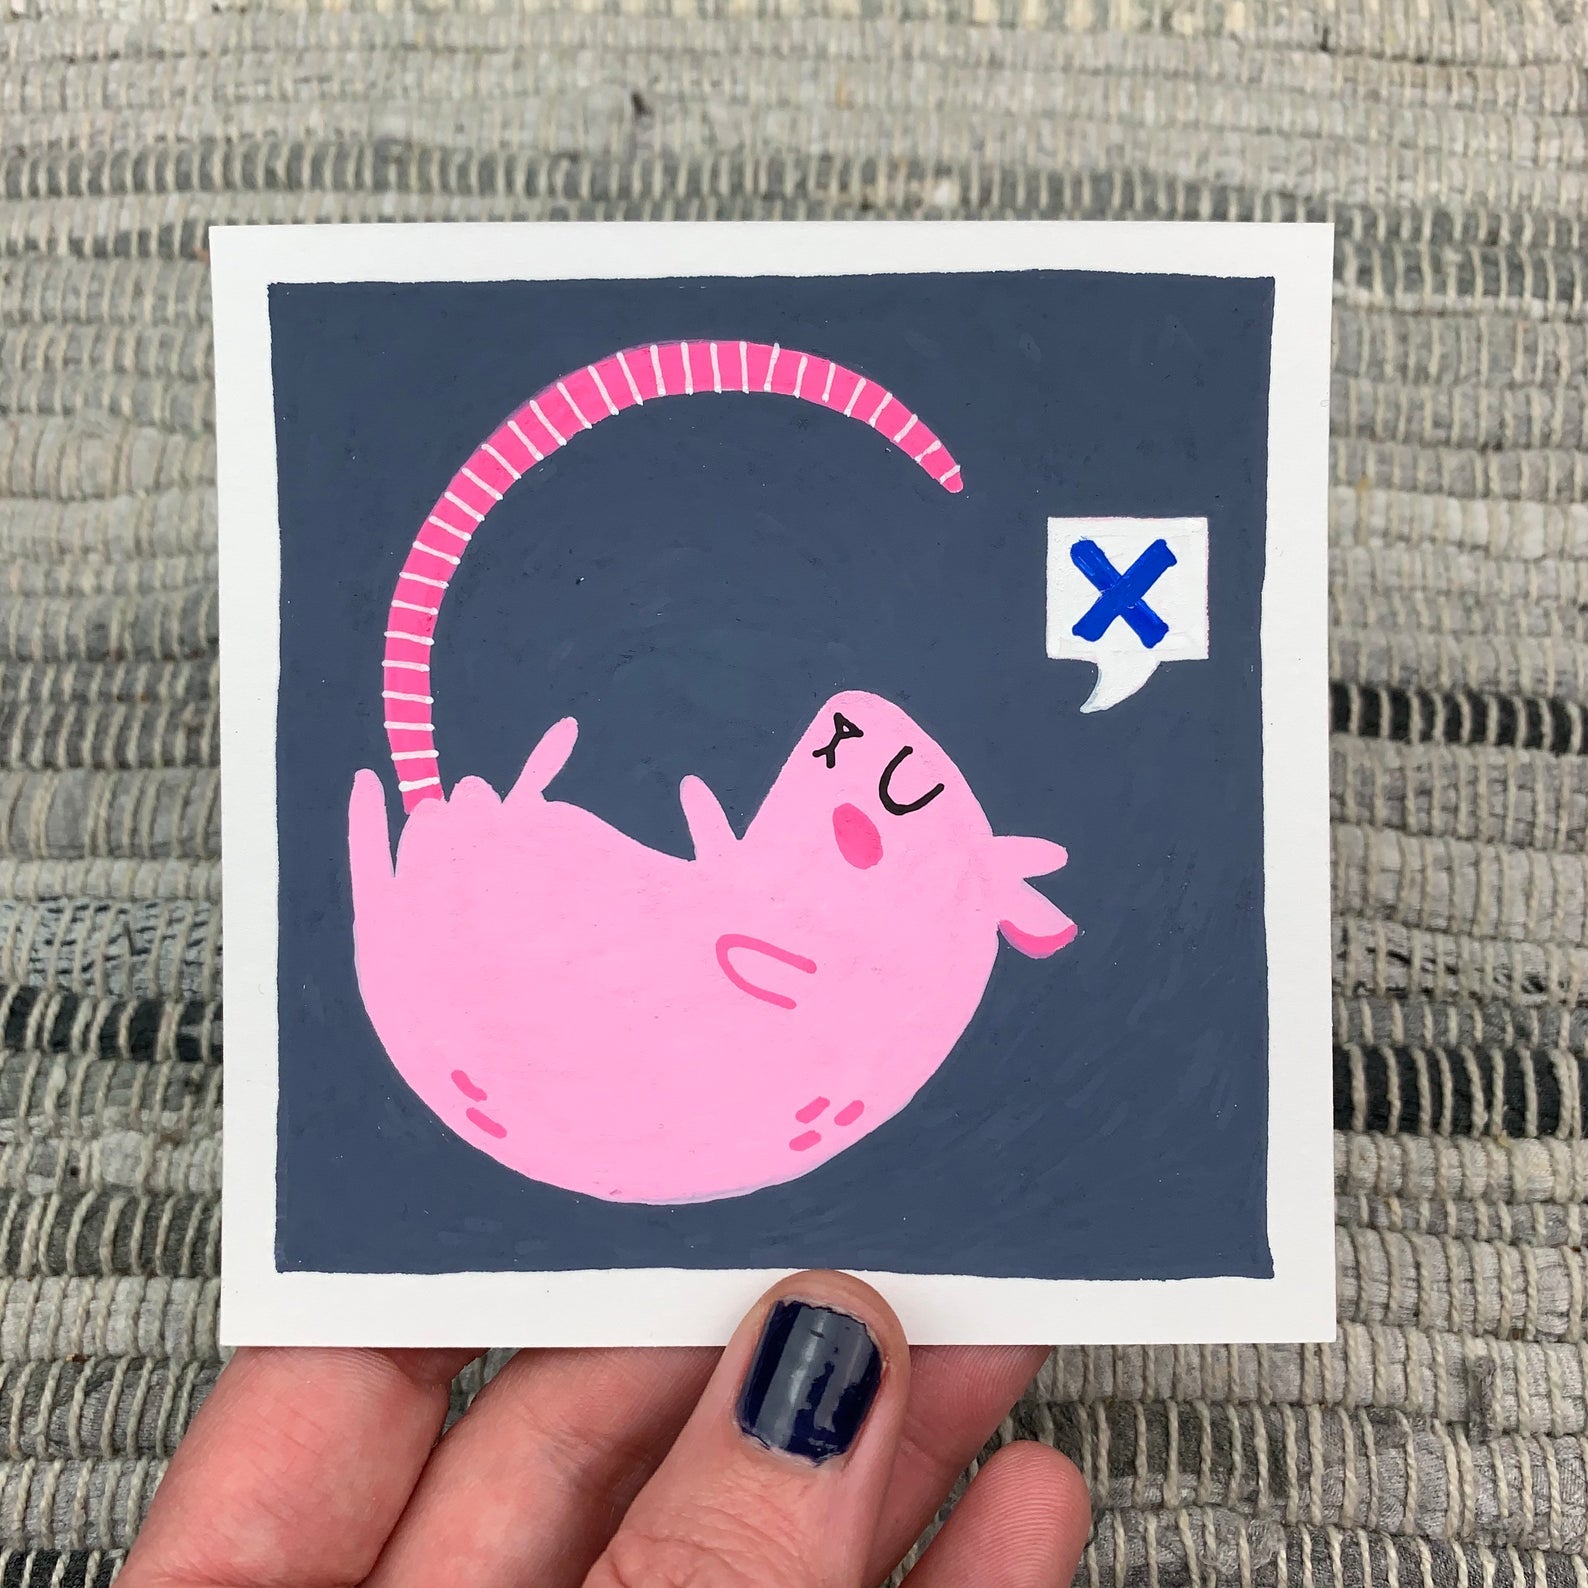 Original artwork of a pink rat with closed eyes and a speech bubble with an "x" in it. Materials used: Uni-Posca paint markers.